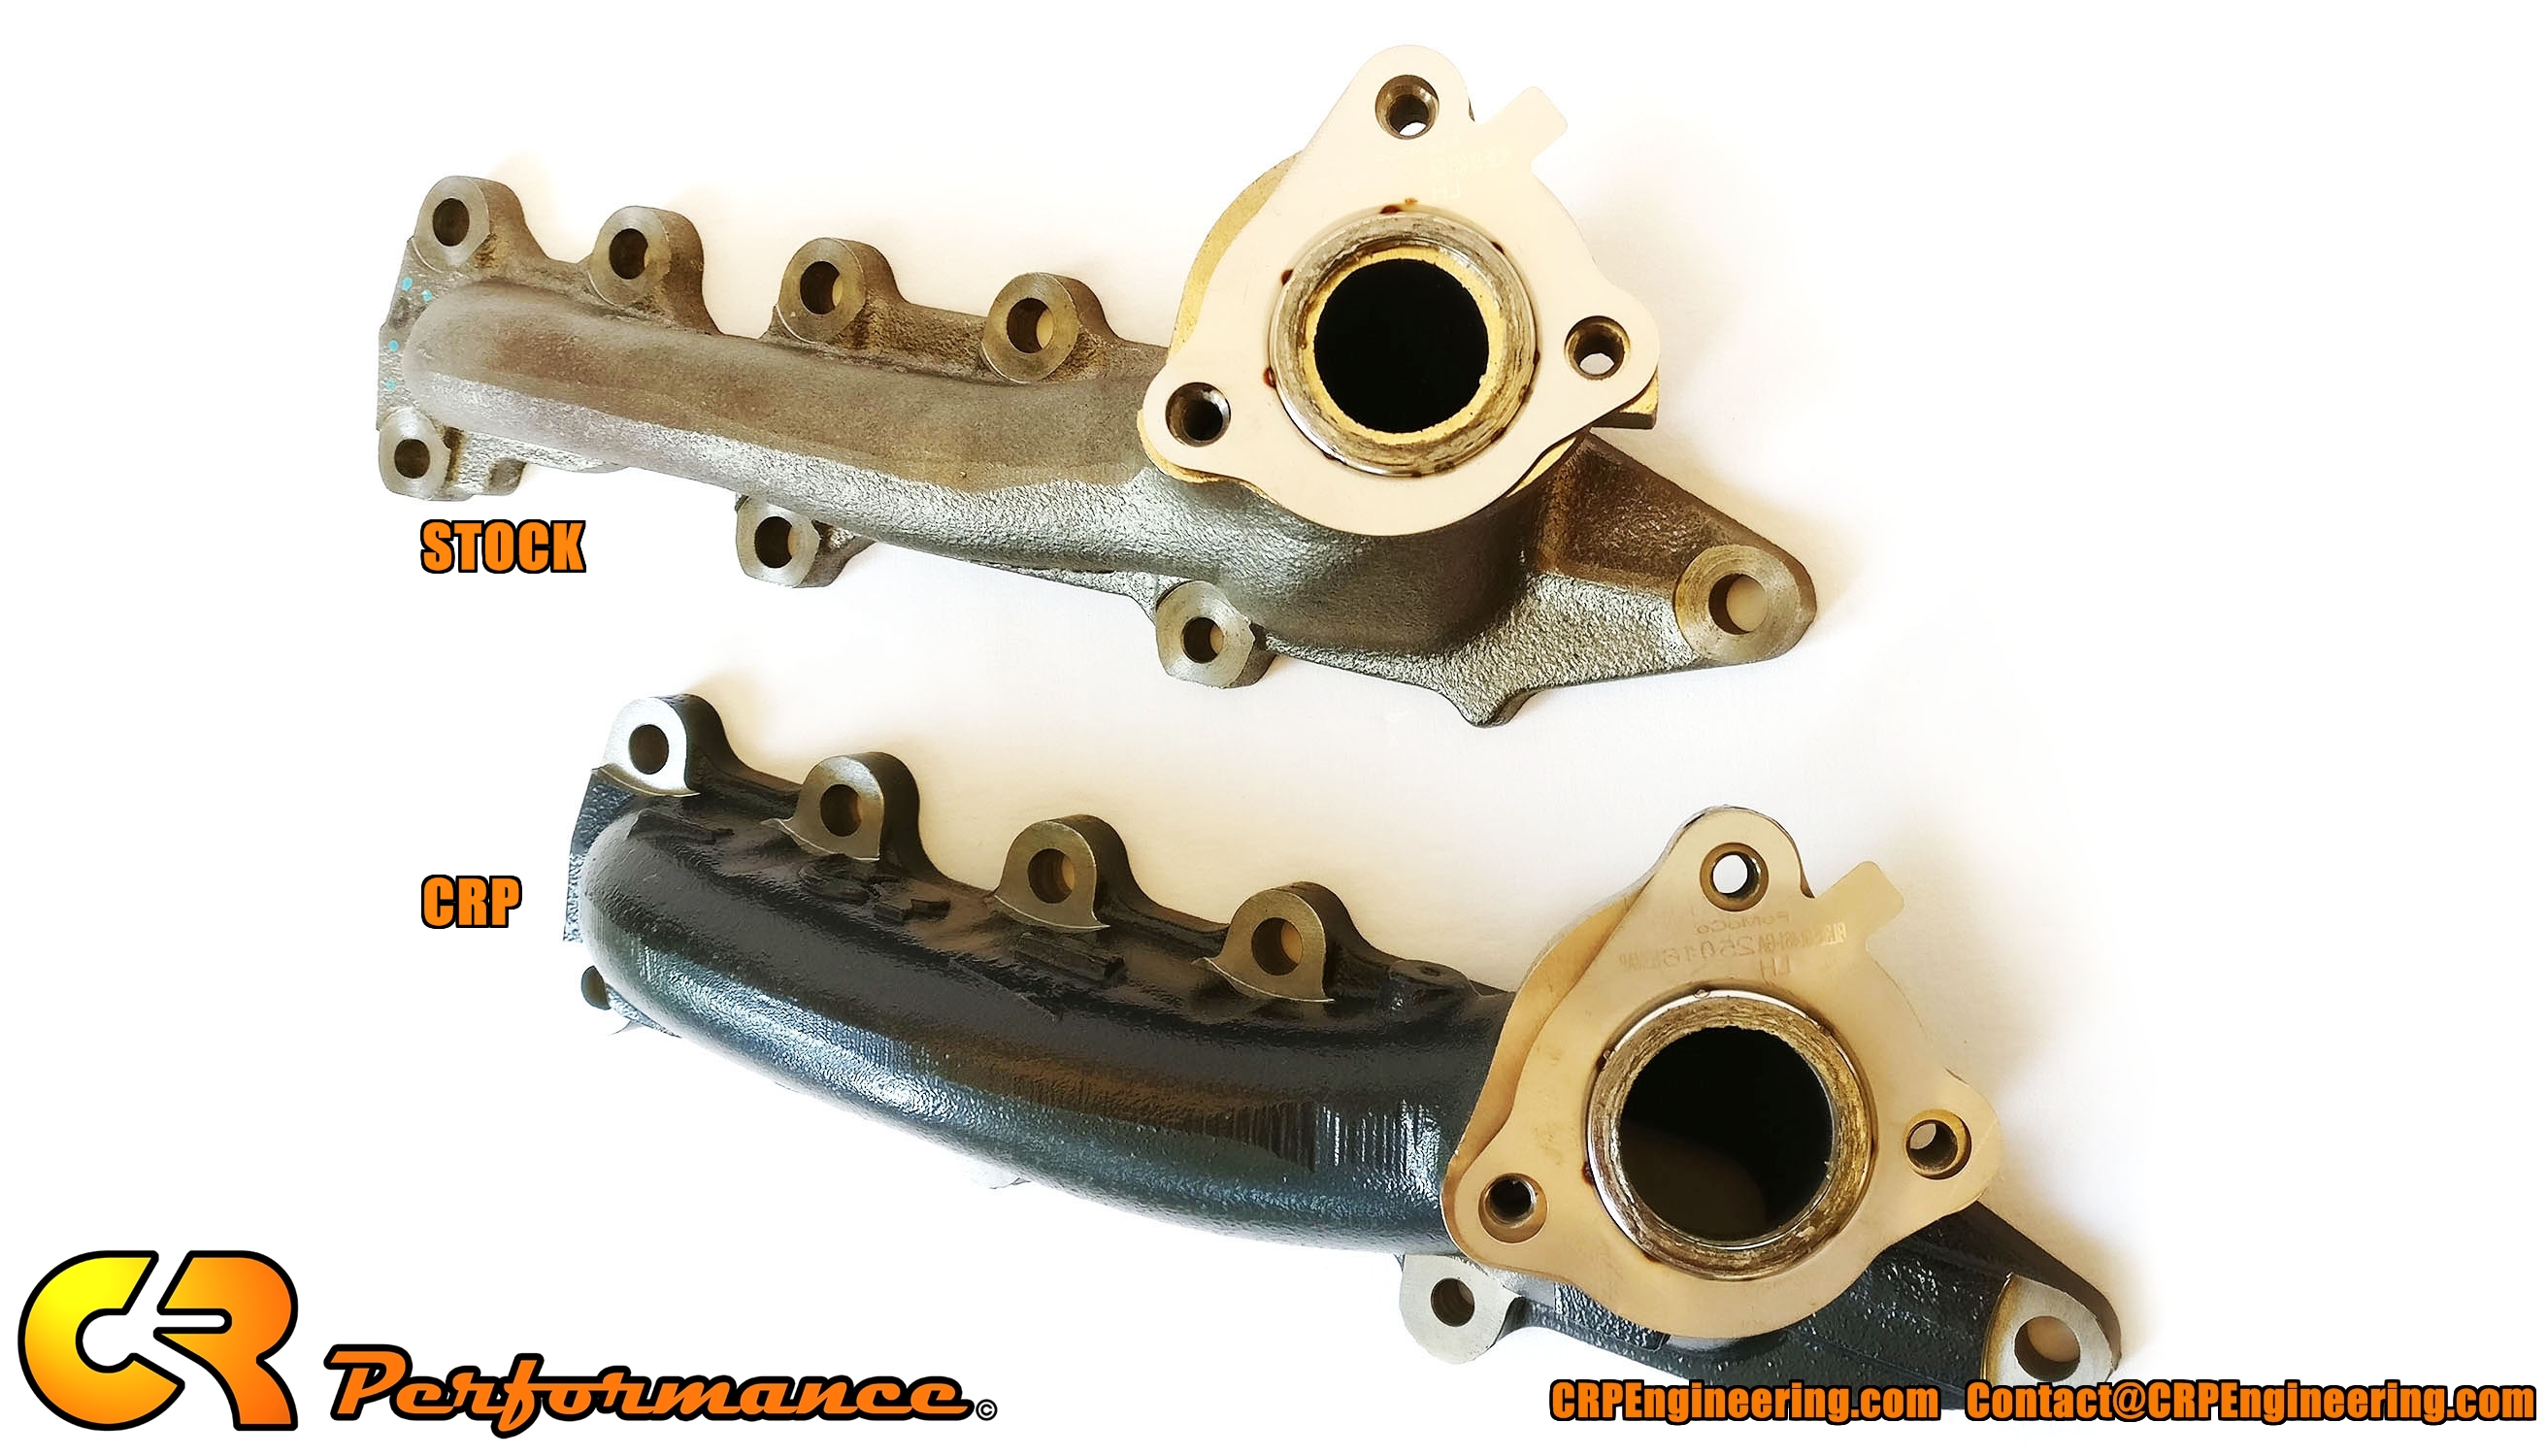 F-150 EcoBoost 3.5L Full Bore Performance Manifolds Now In Stock – CR